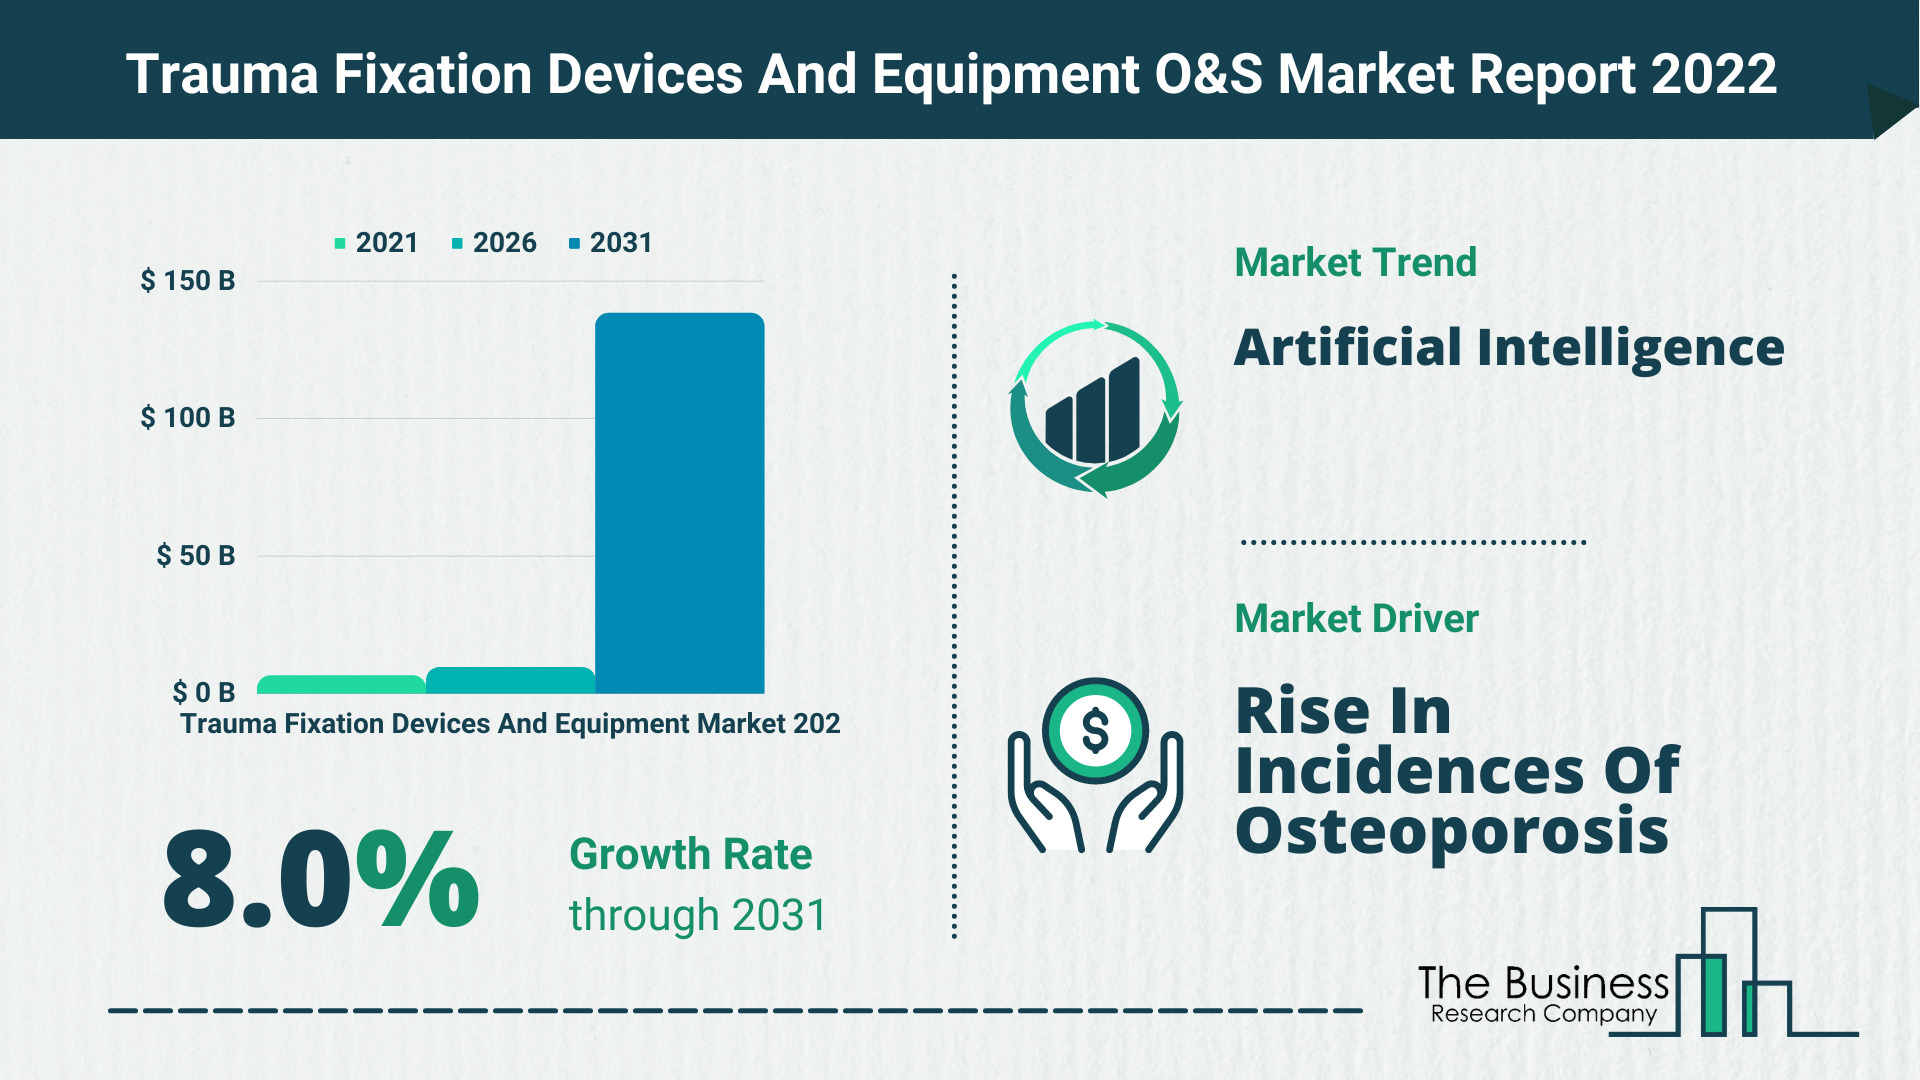 Global Trauma Fixation Devices And Equipment Market